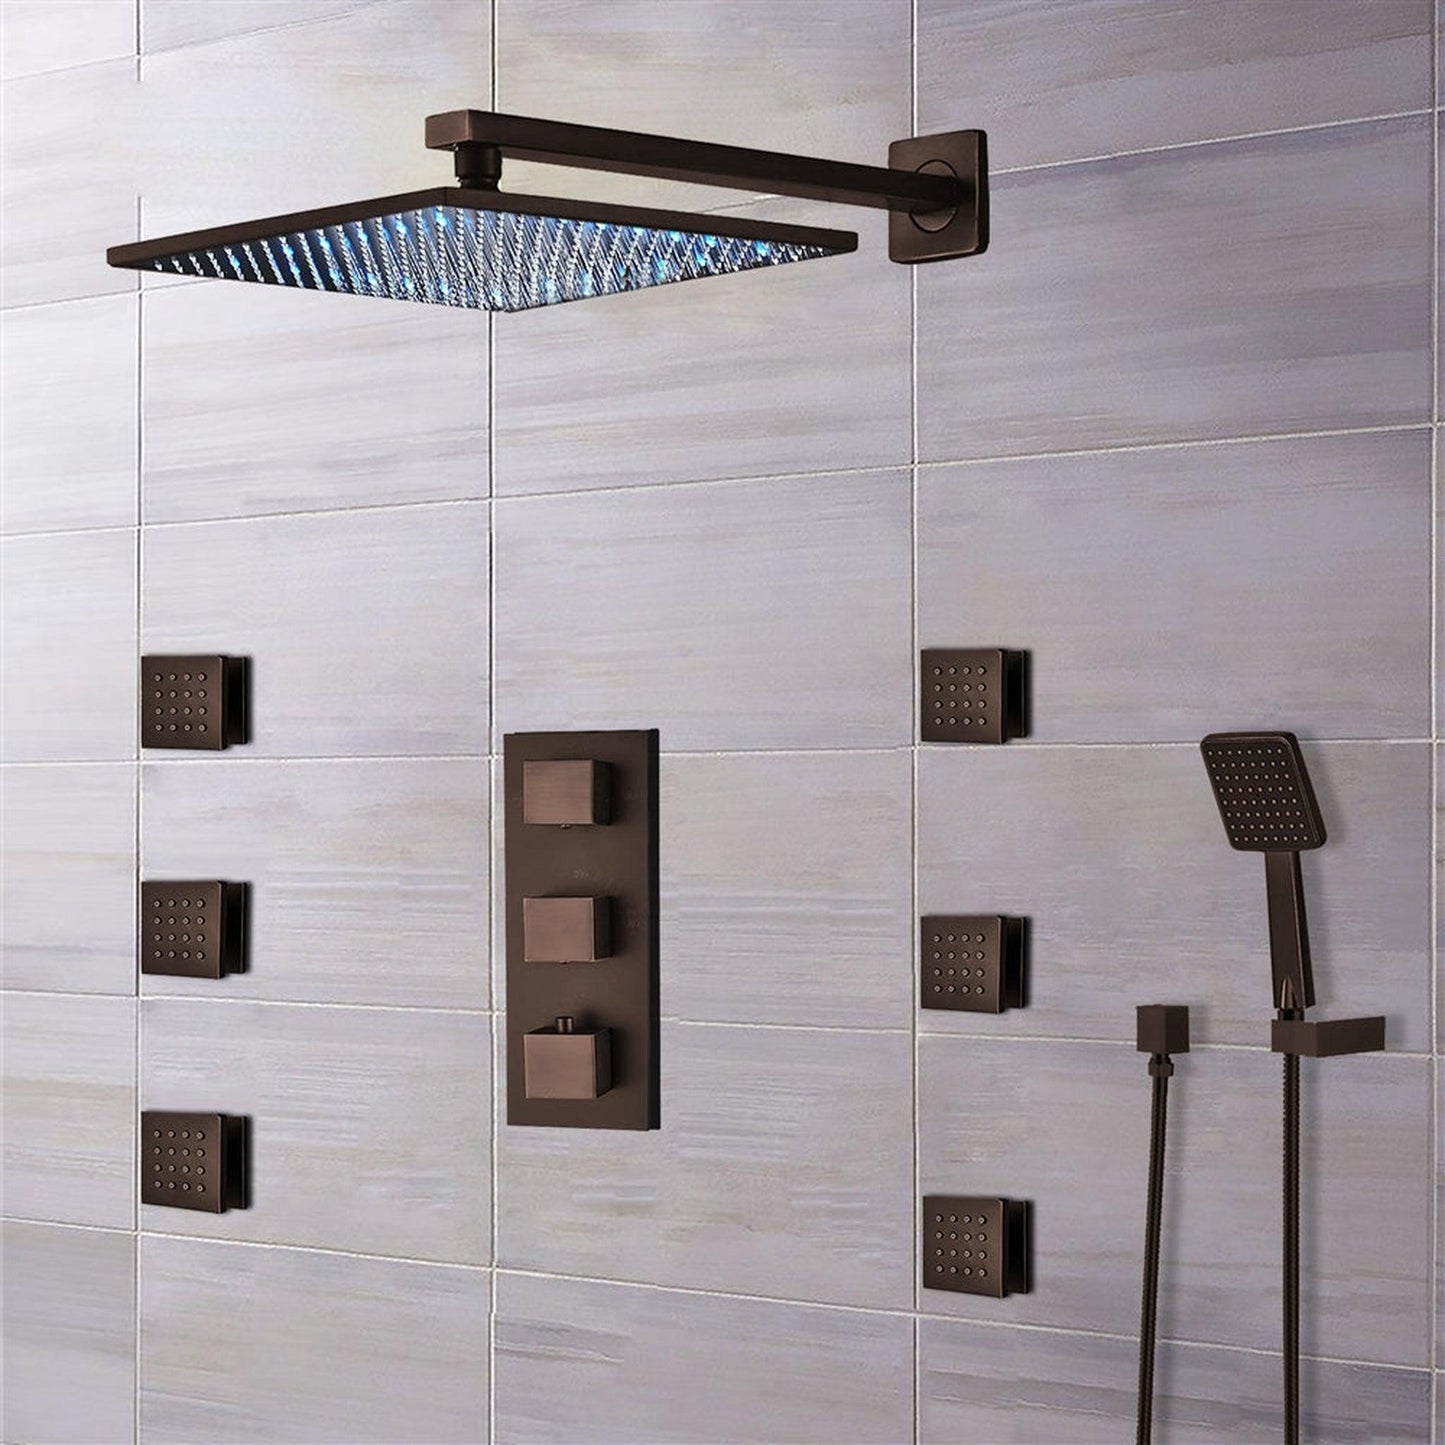 Fontana Sierra 10" Light Oil Rubbed Bronze Square Ceiling Mounted LED Shower System With 6-Jet Body Sprays and Hand Shower